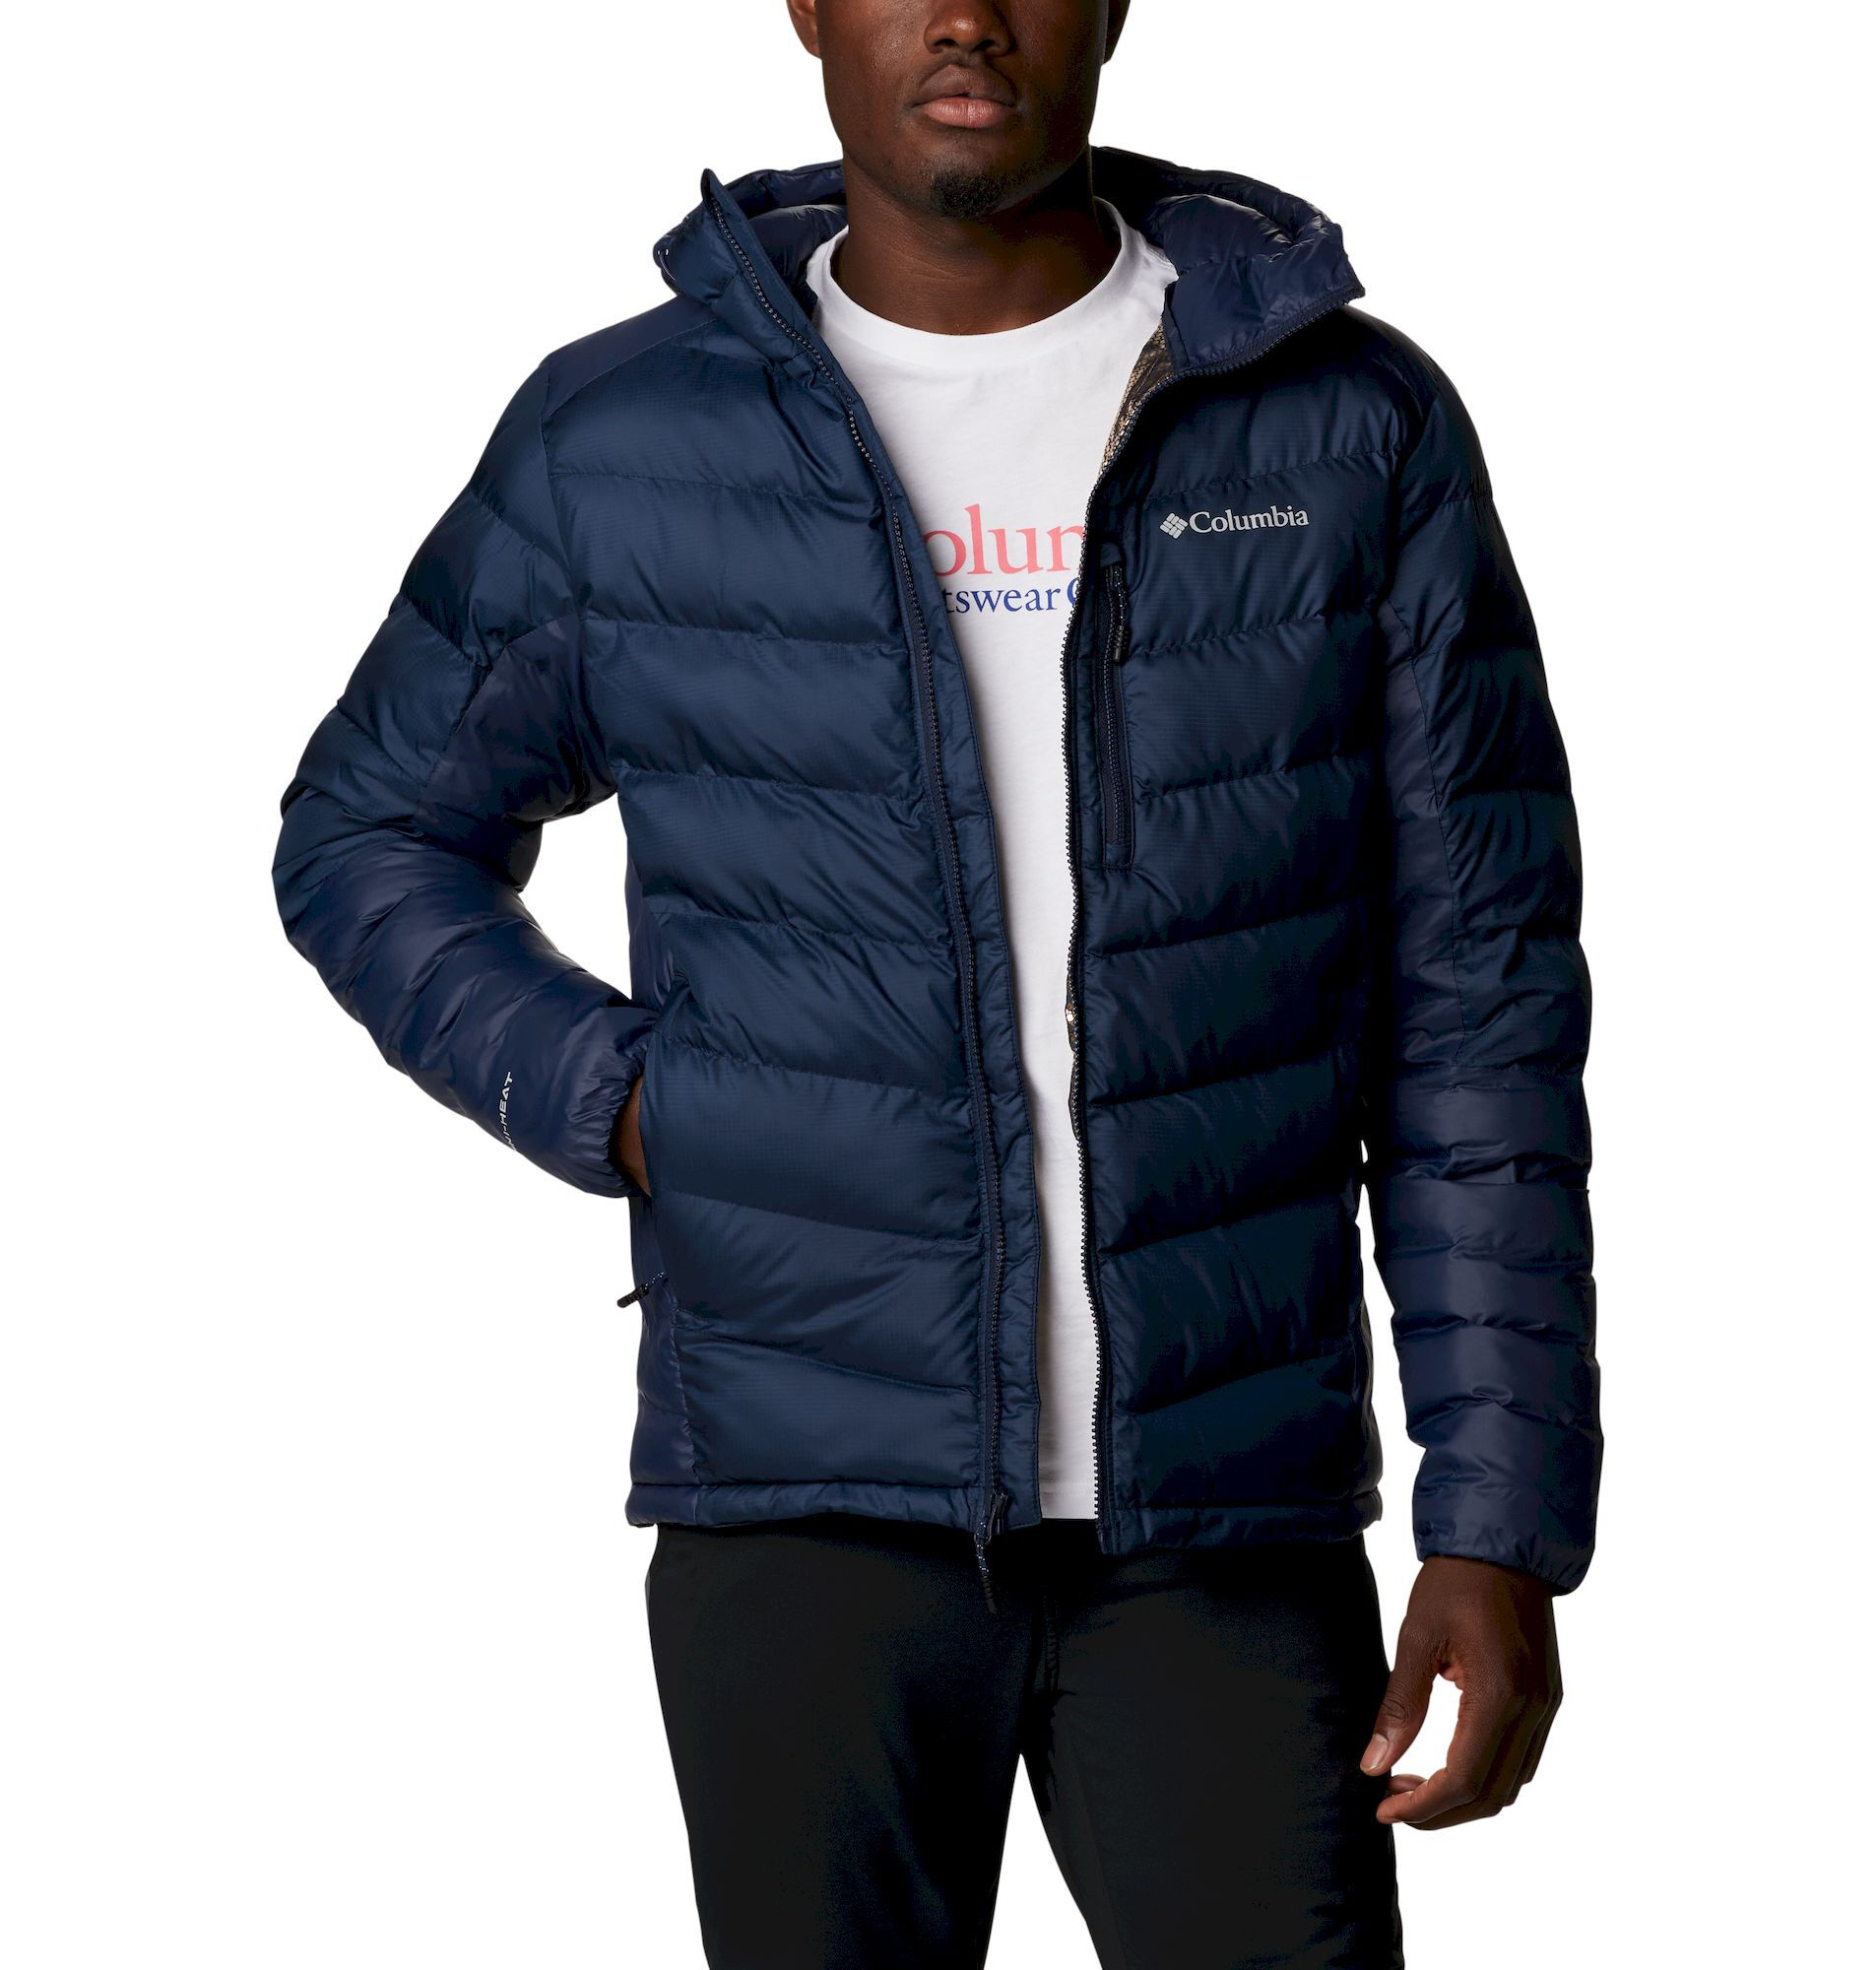 https://images.hardloop.fr/457577/columbia-labyrinth-loop-hooded-jacket-doudoune-homme.jpg?w=auto&h=auto&q=80